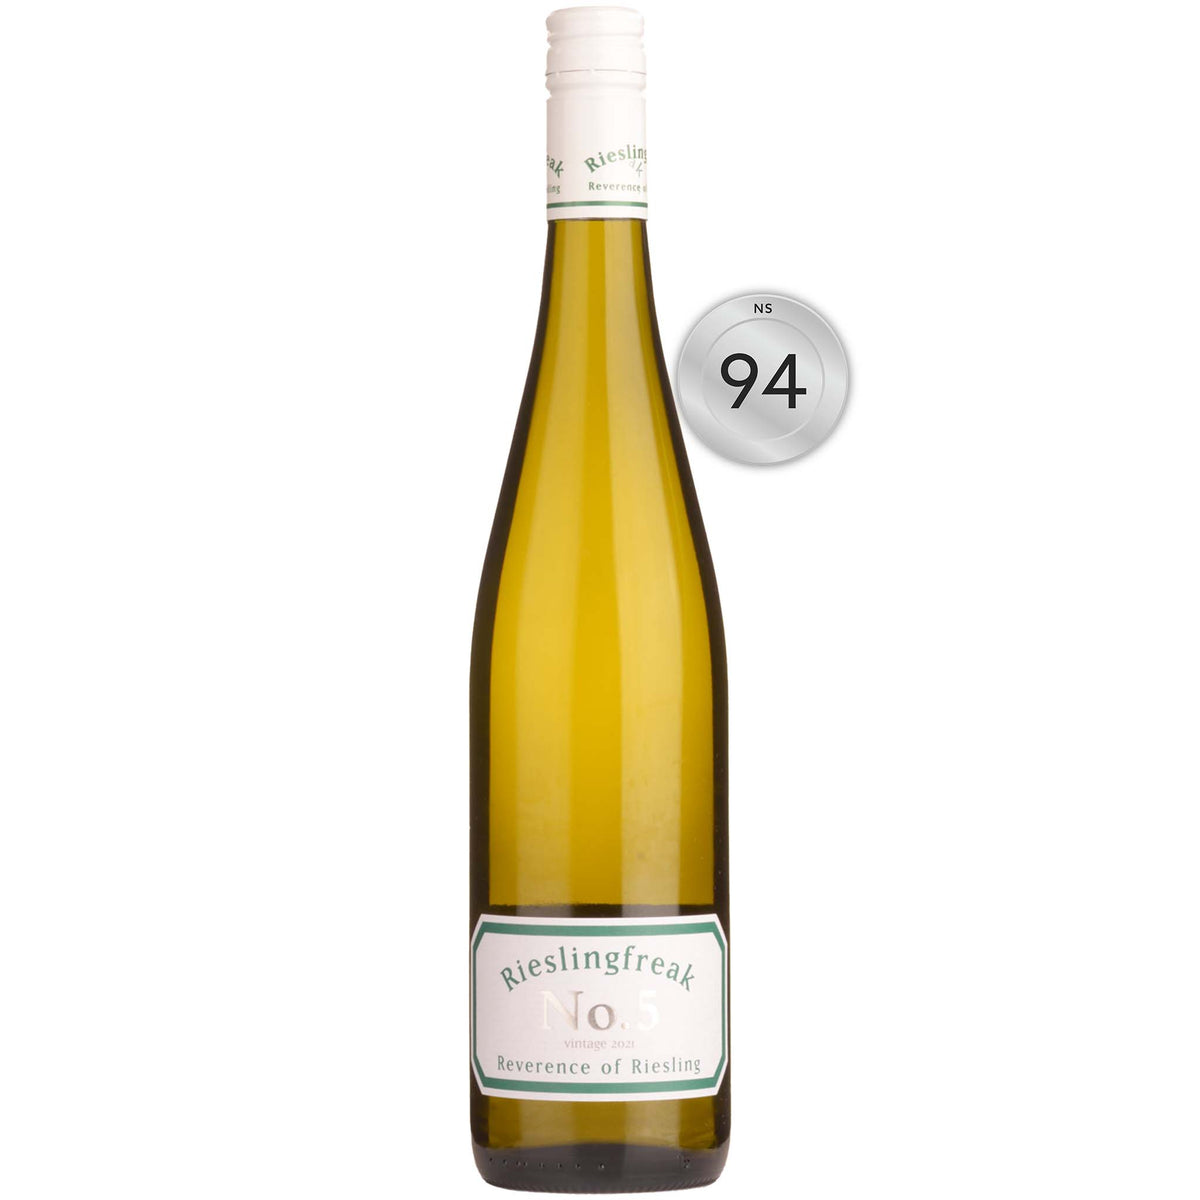 Rieslingfreak No 5 Clare Valley Off Dry Riesling 2021